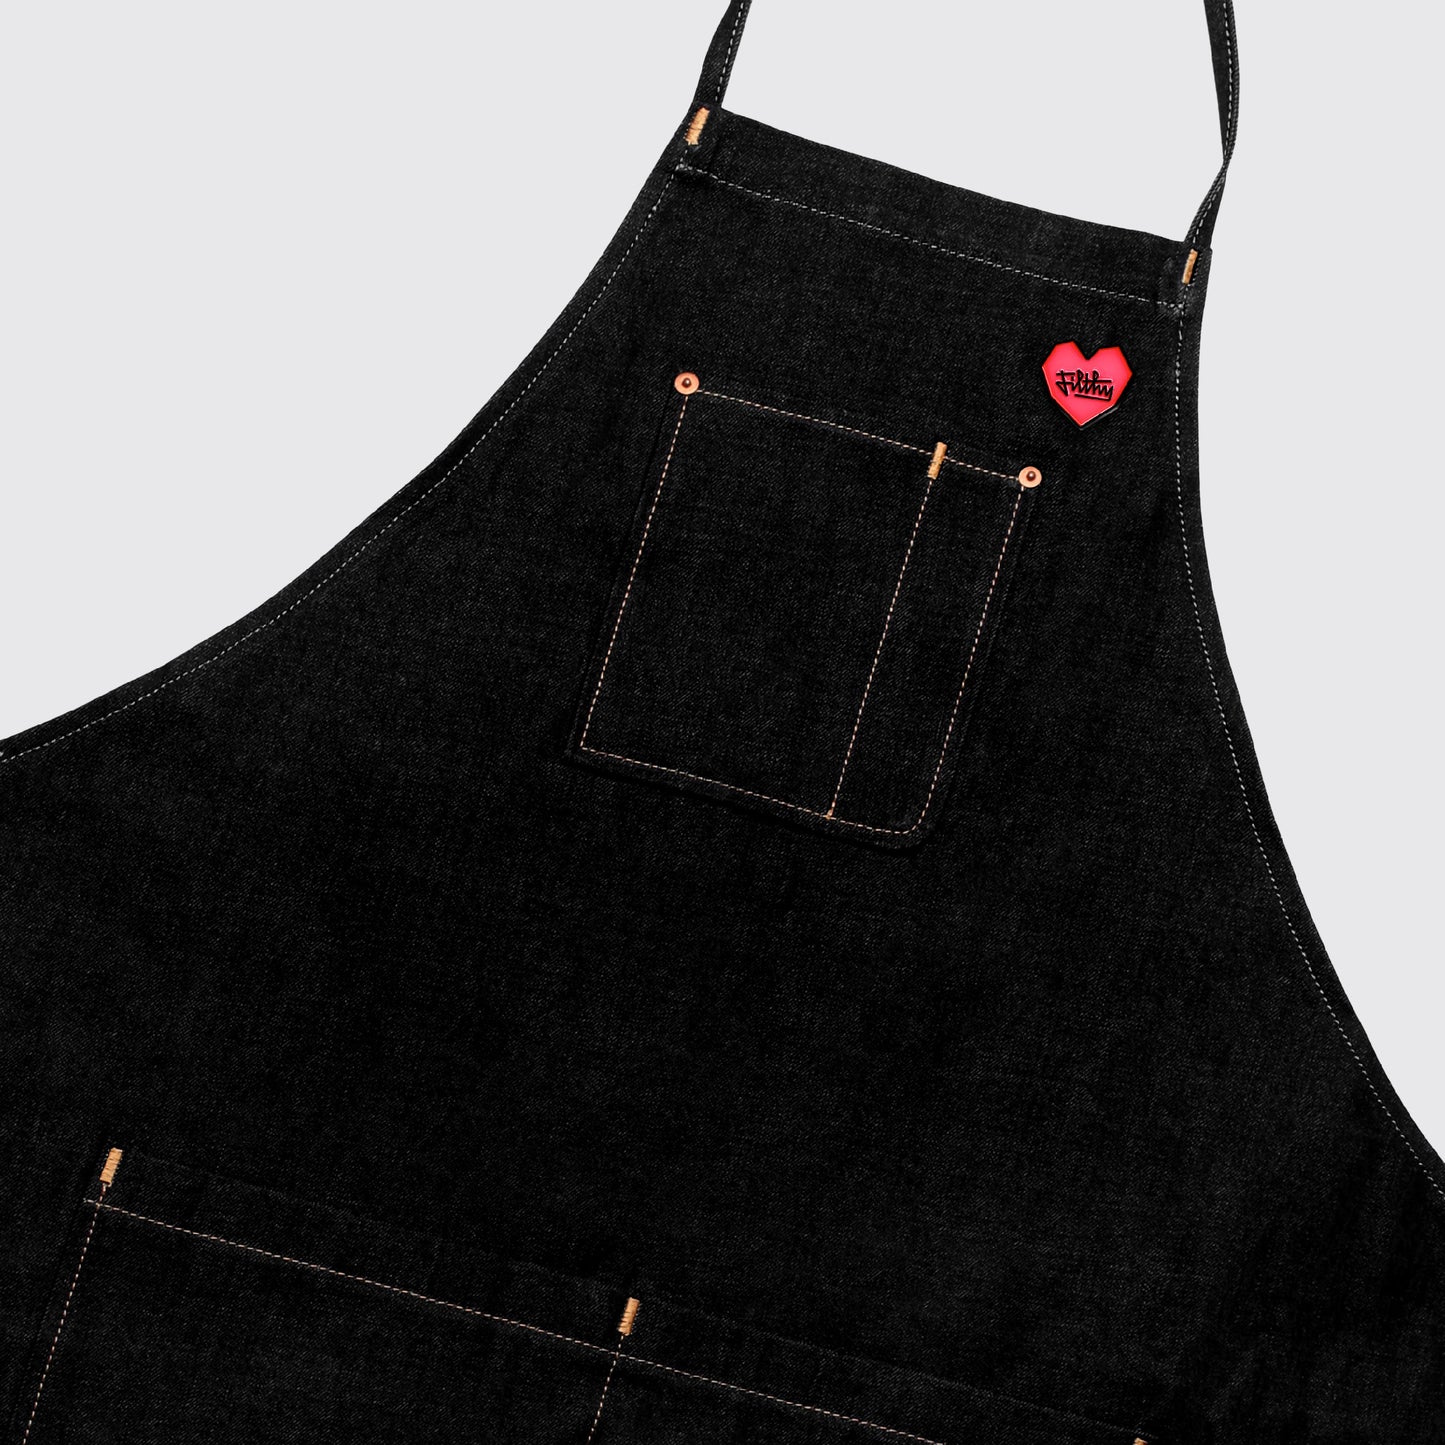 Filthy Love Pin on apron